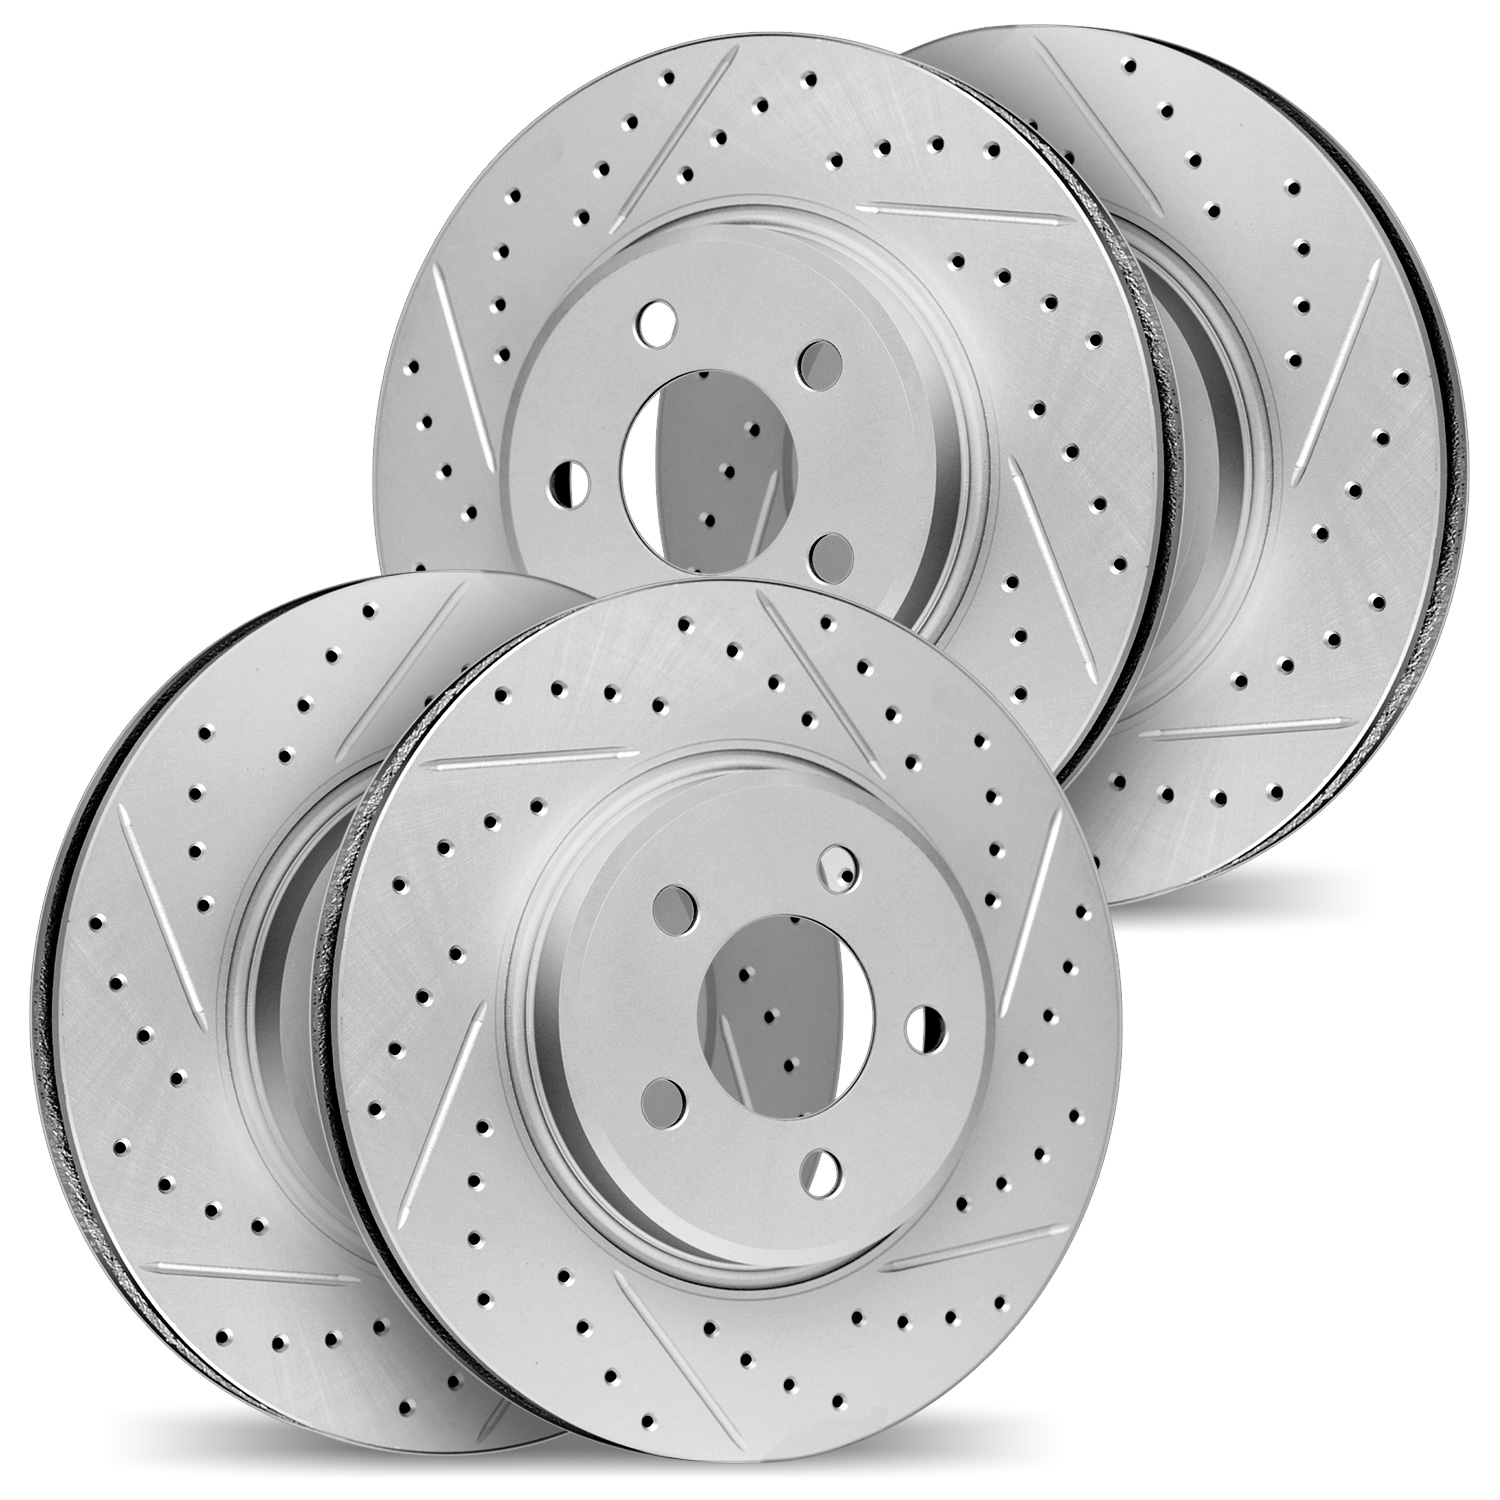 2004-74007 Geoperformance Drilled/Slotted Brake Rotors, 2003-2015 Multiple Makes/Models, Position: Front and Rear